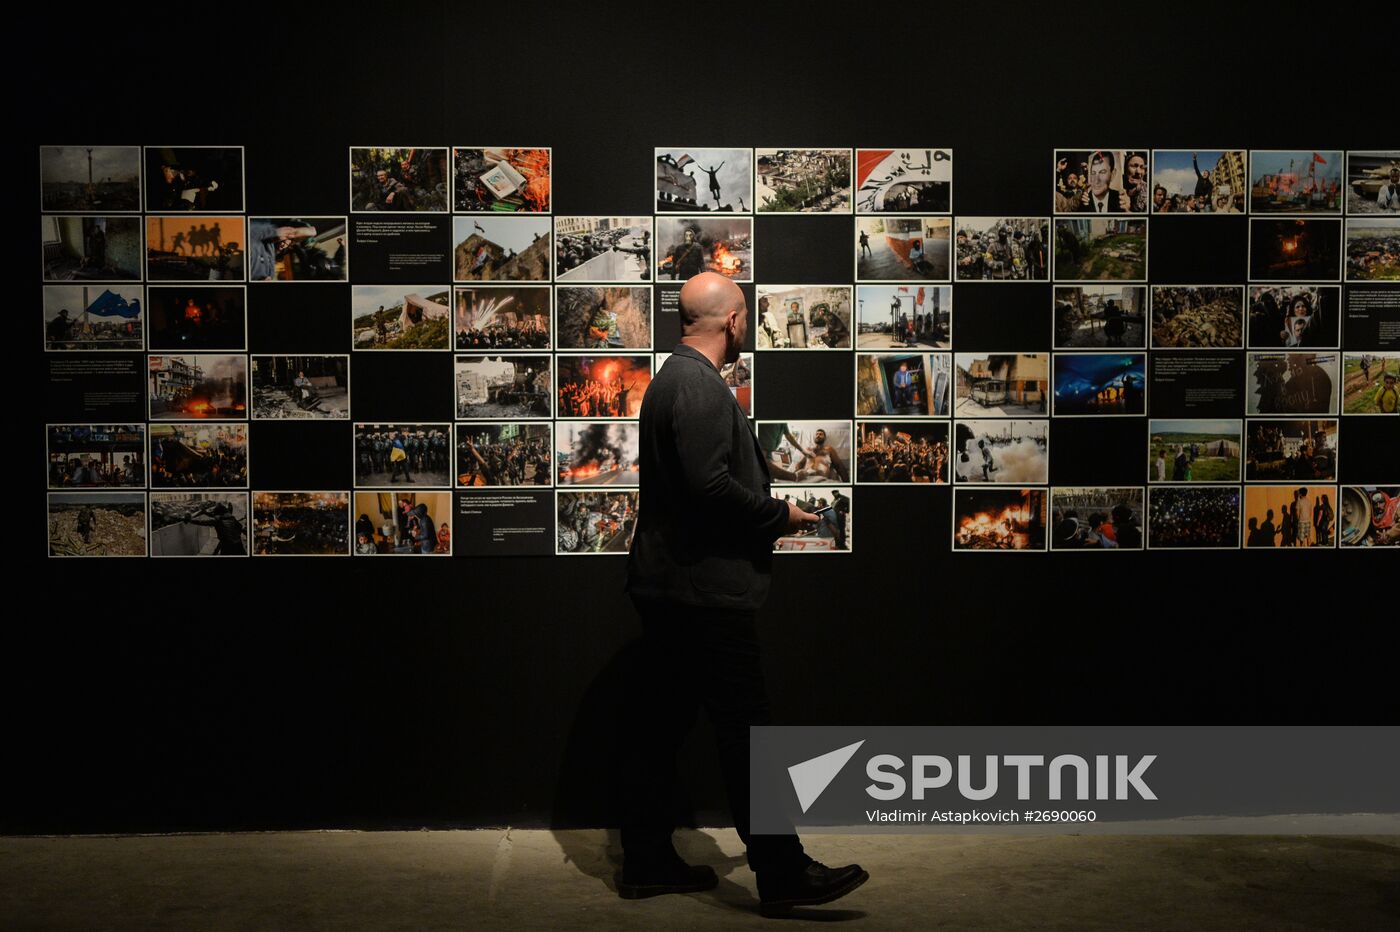 Opening of the exhibition "So that you know"